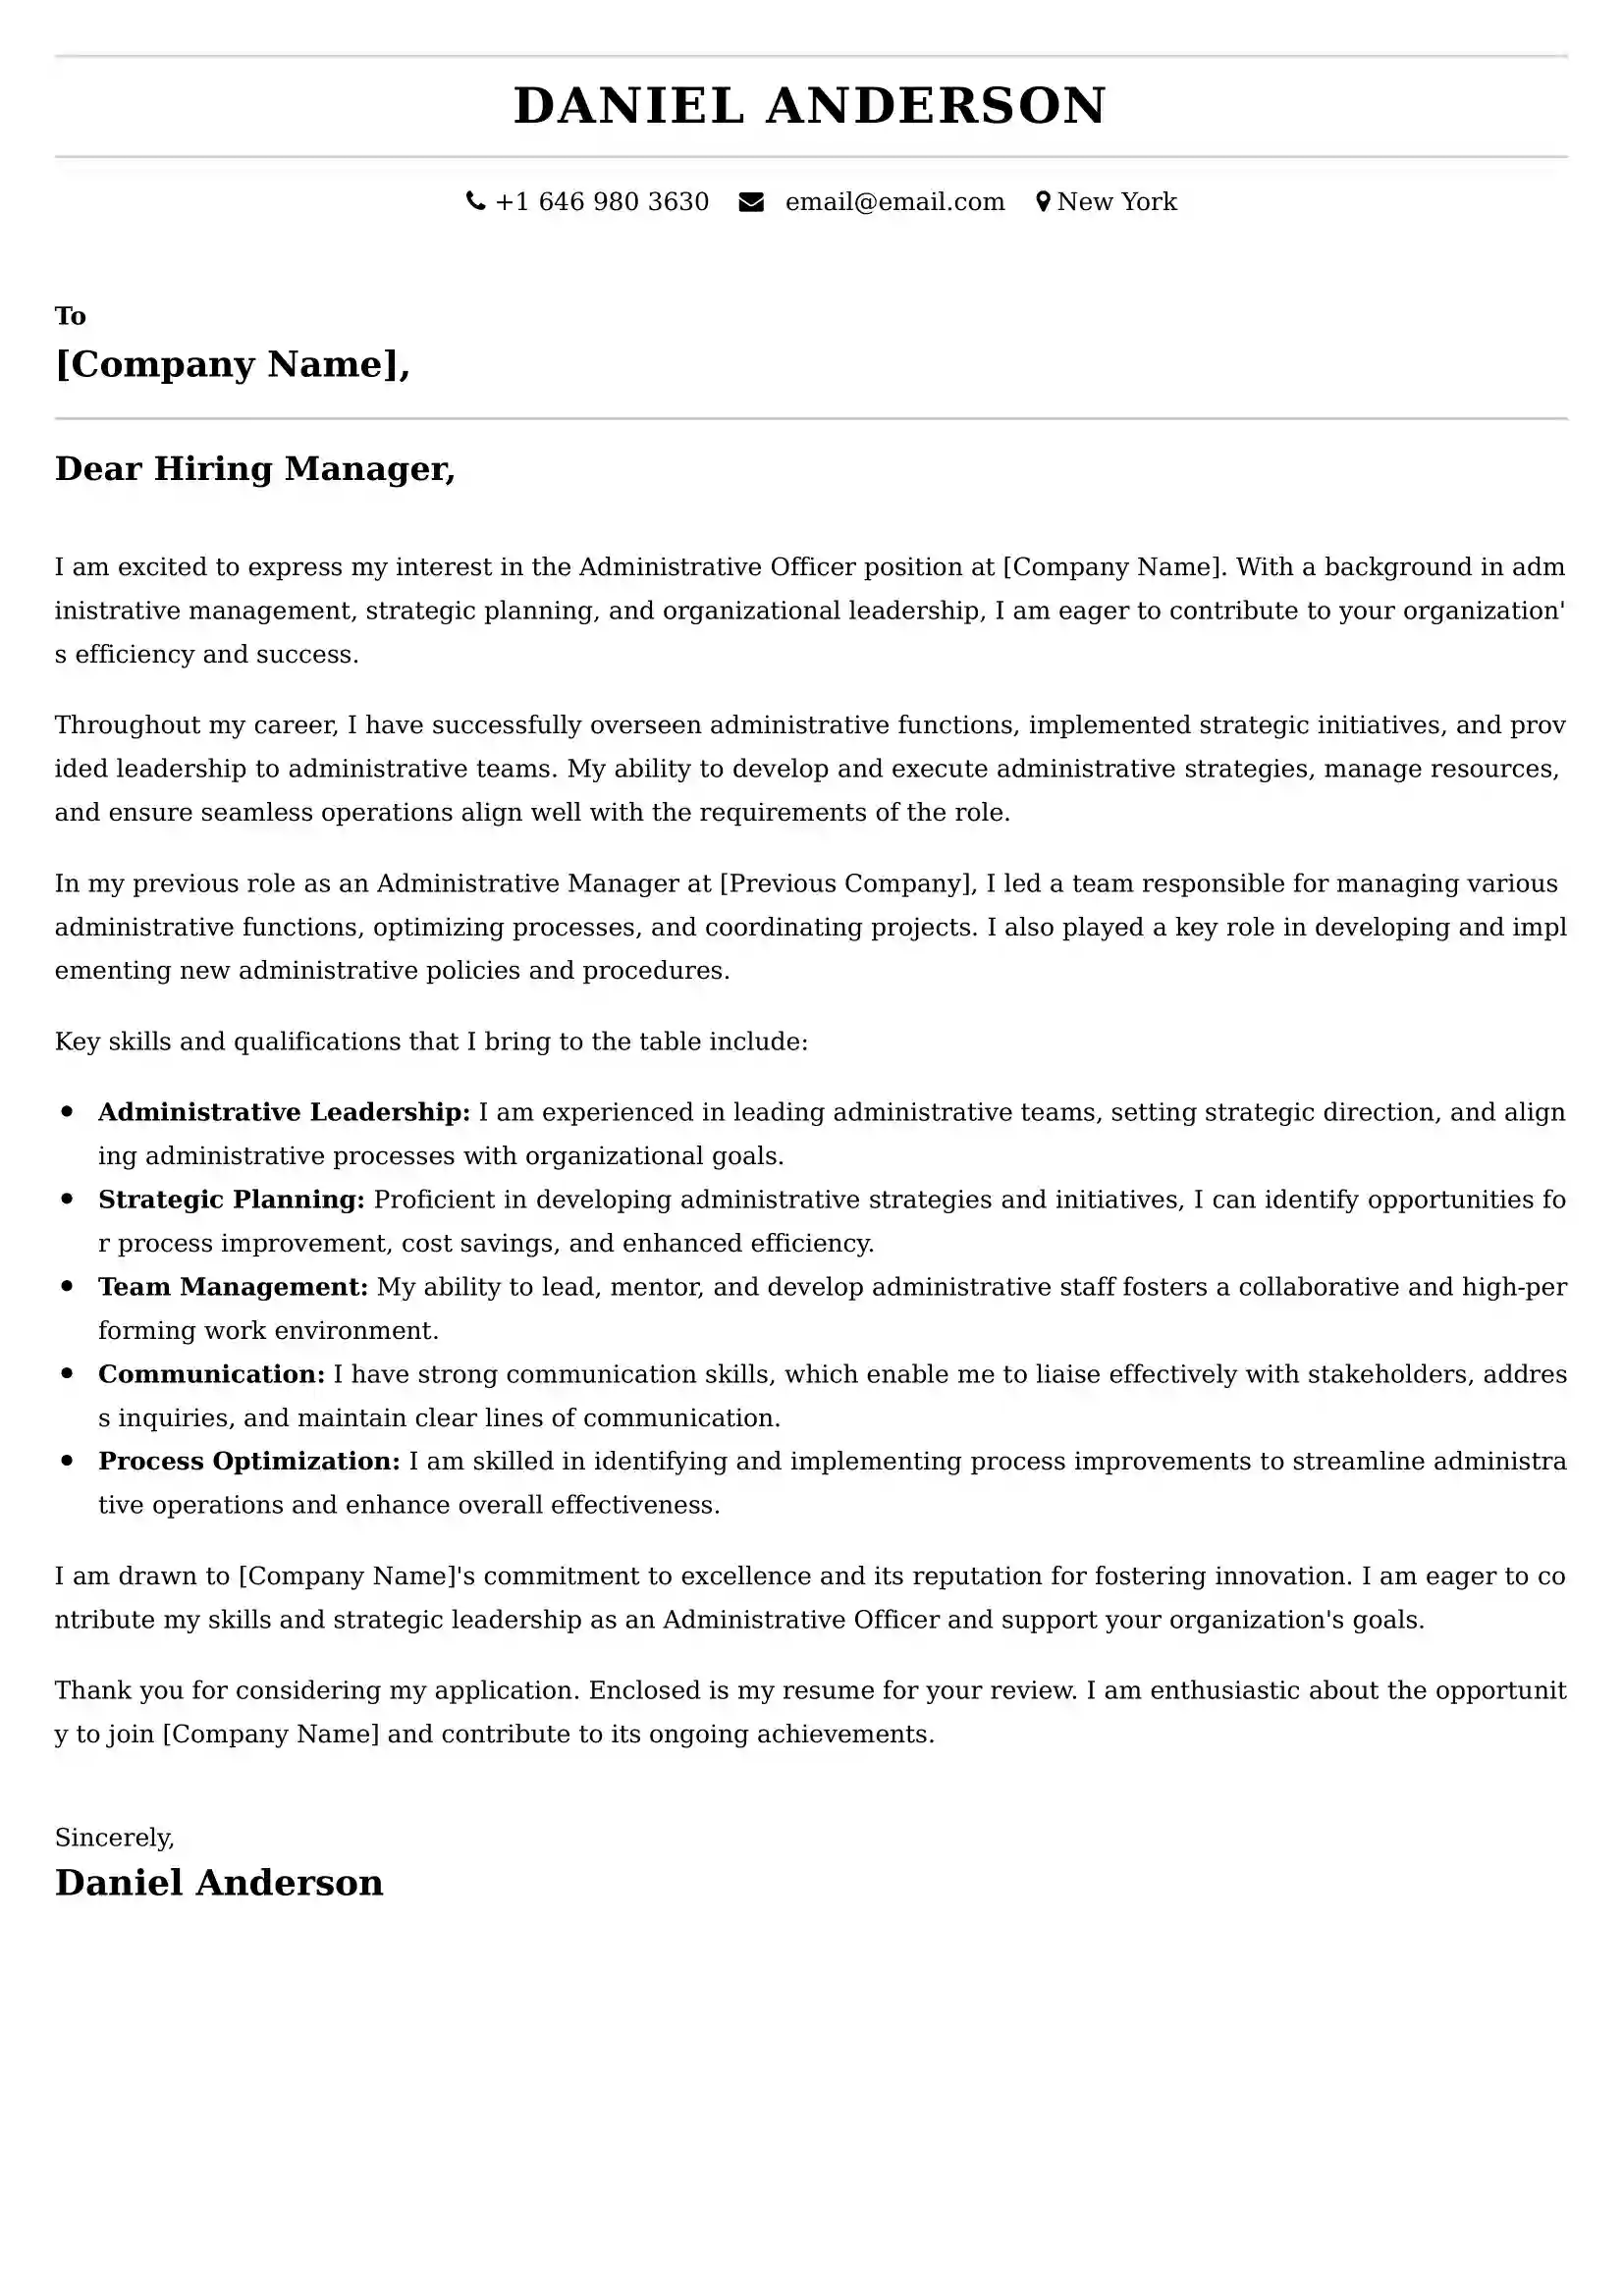 Administrative Officer Cover Letter Examples for UK 